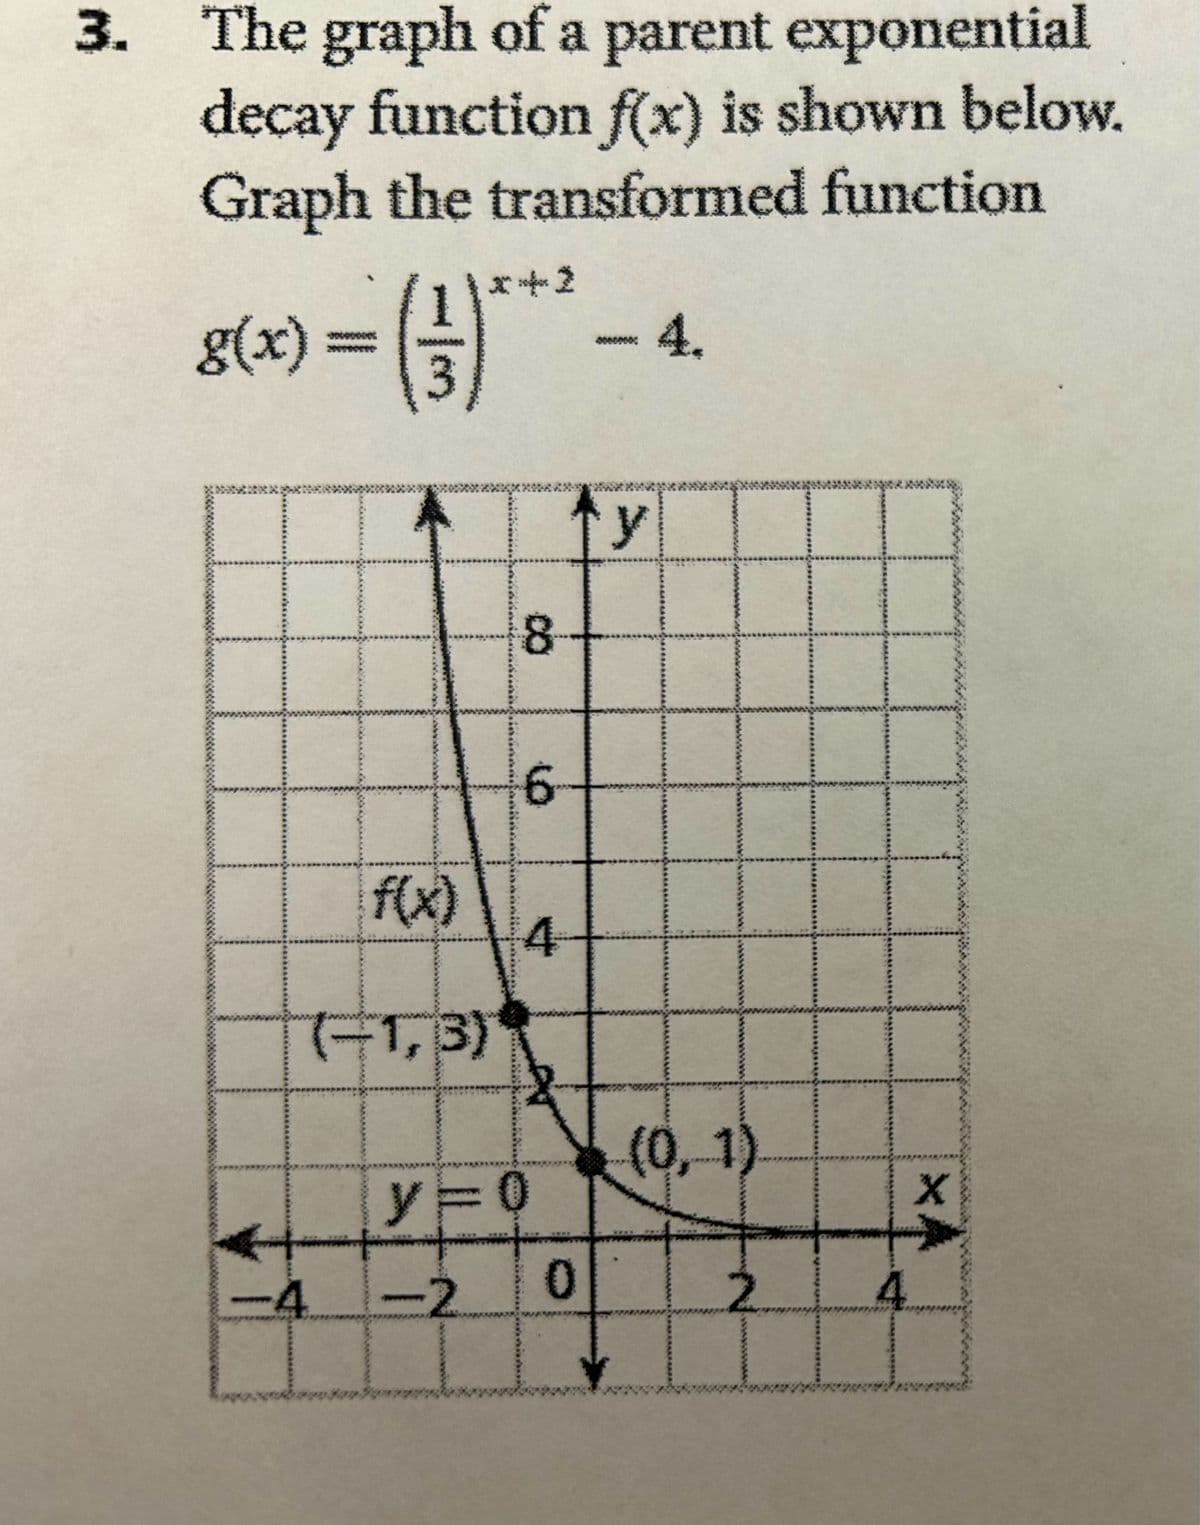 3. The graph of a parent exponential
decay function f(x) is shown below.
Graph the transformed function
g(x)
(3)
2
00000000
- 4.
8
CO
f(x)
LO
6
y
4
(-1,3)
(0, 1)
F
y=0
-4 -2
0
2
4
XA